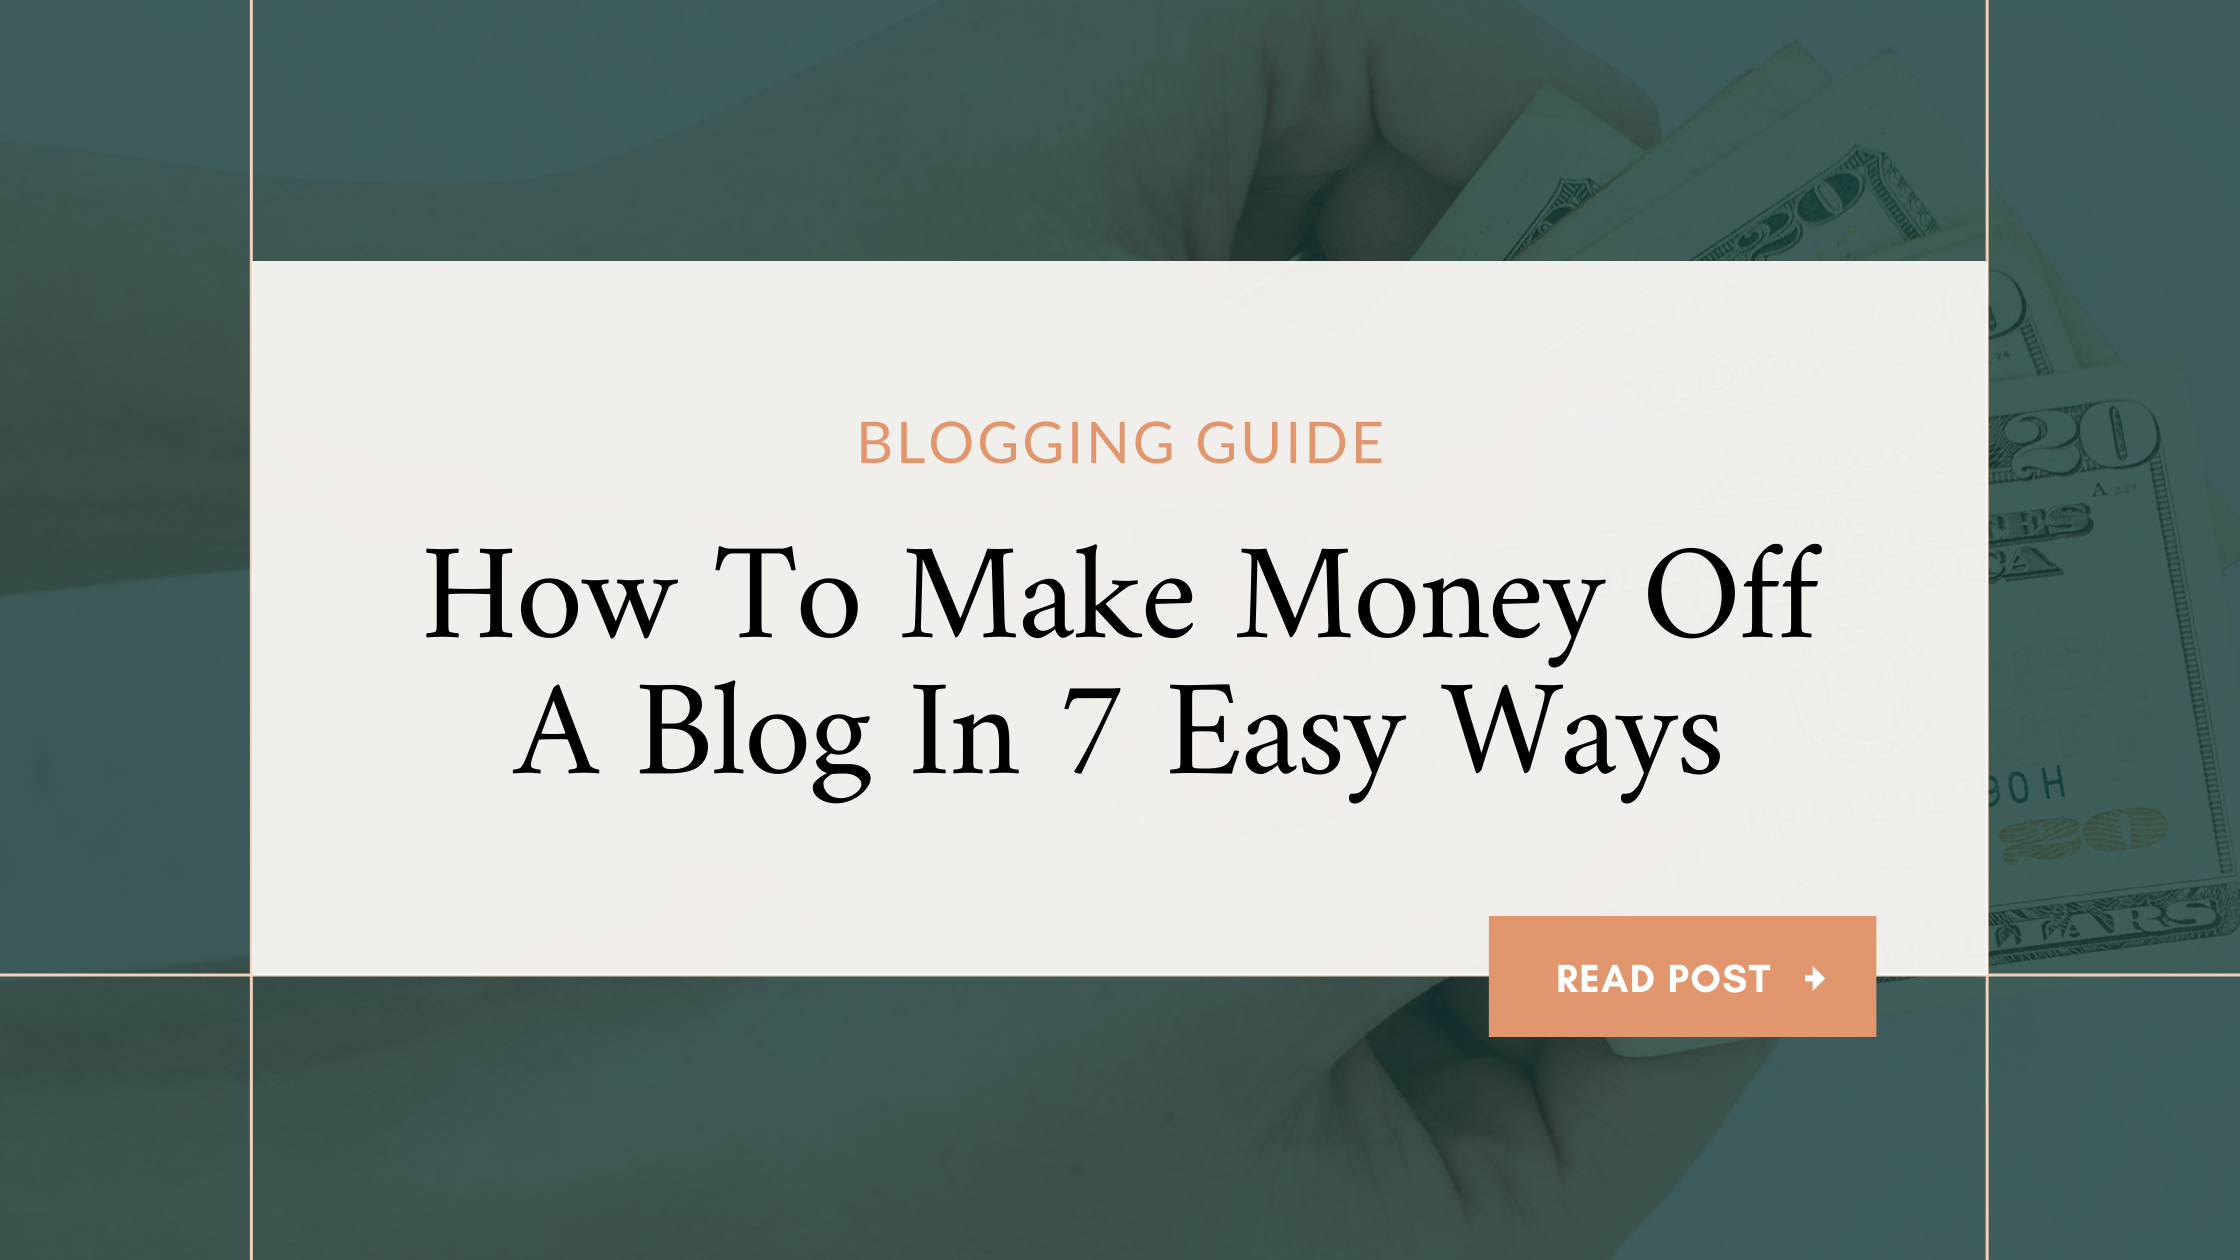 How To Make Money Off A Blog In 7 Easy Ways